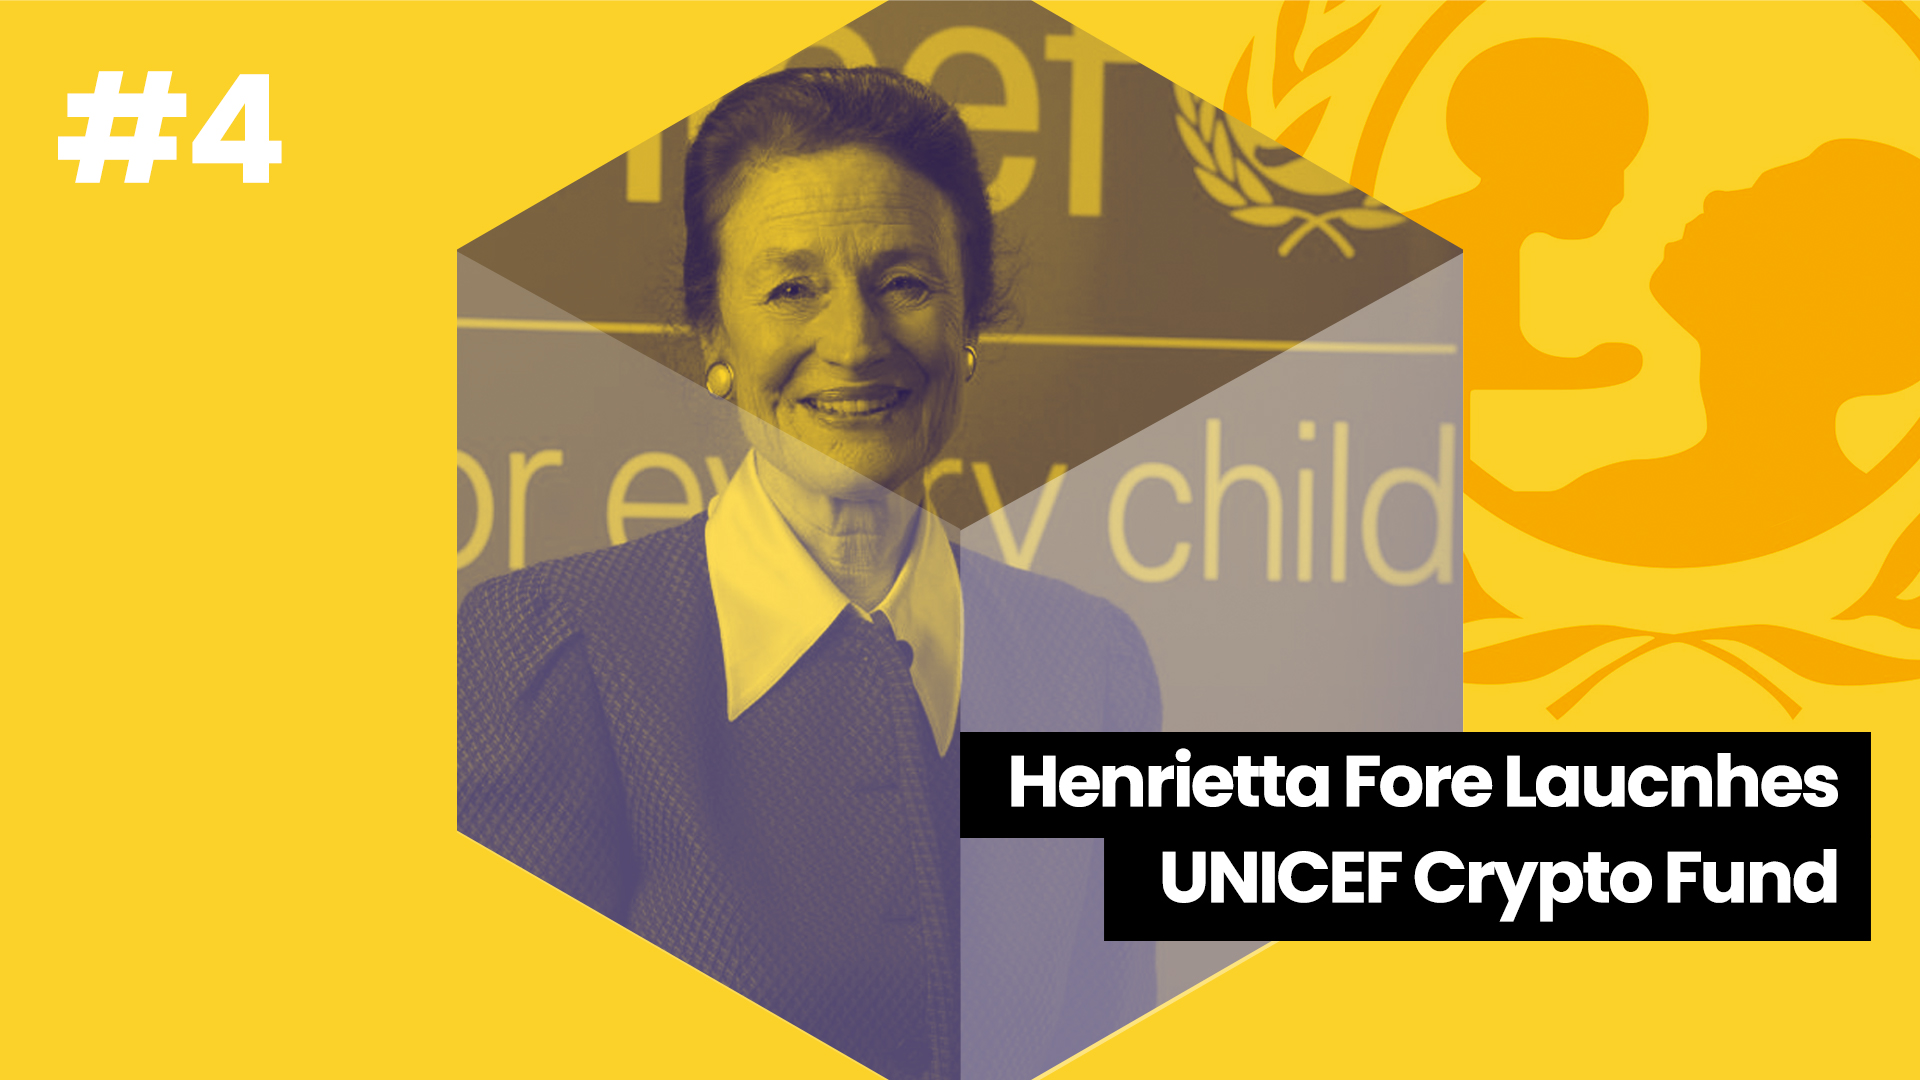 Day 4 Henrietta Fore Laucnhes UNICEF Crypto Fund | The Giving Block